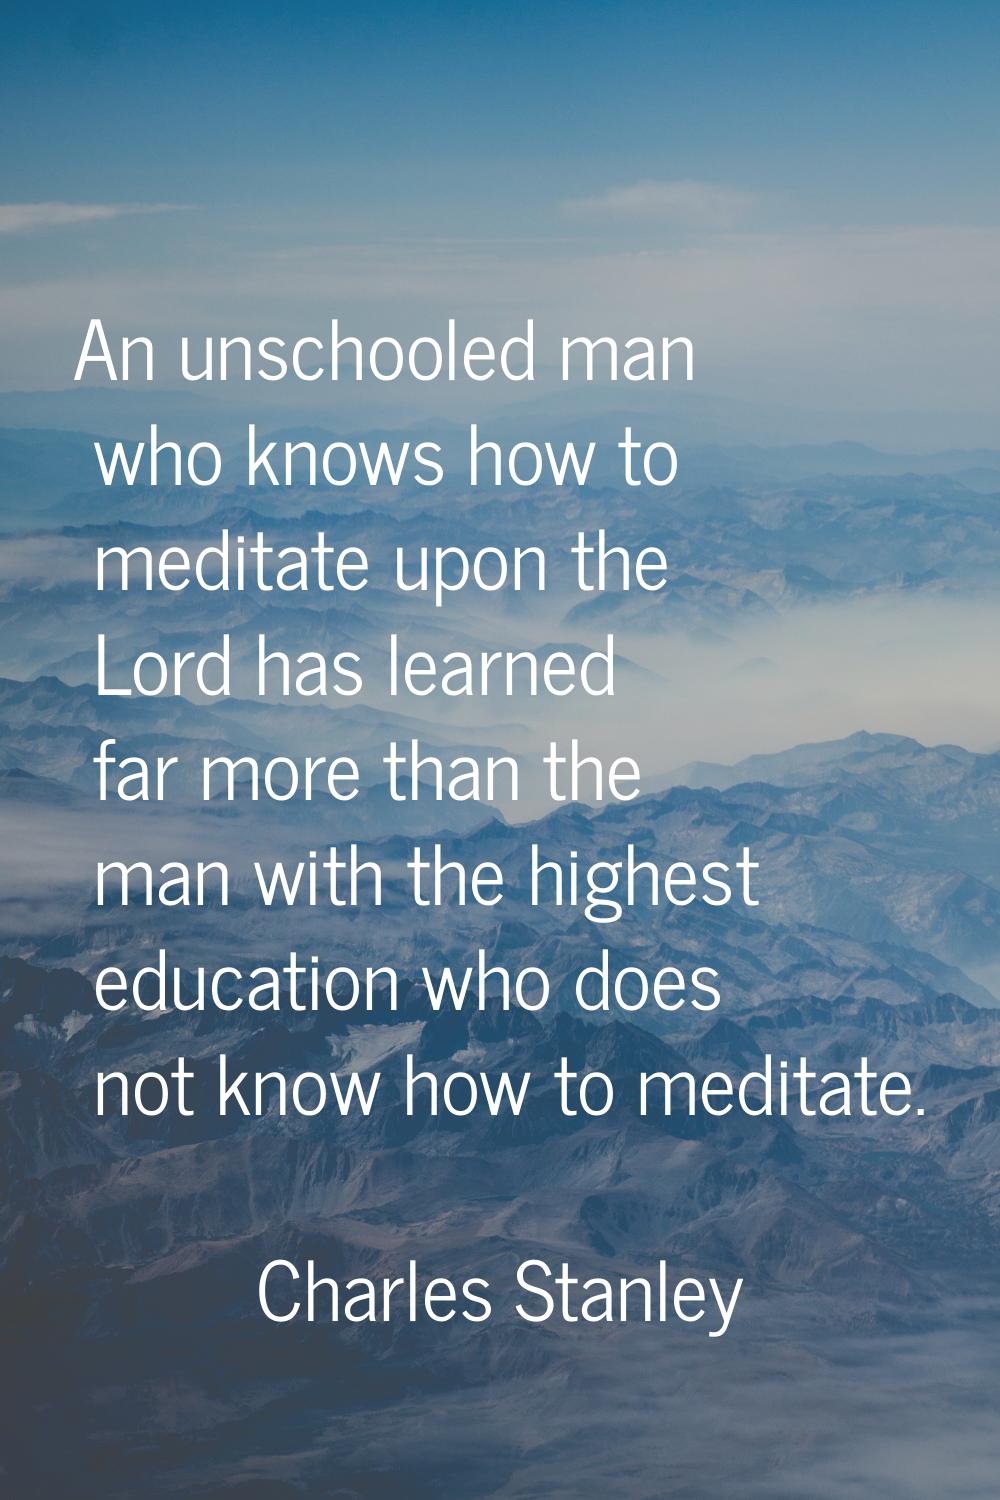 An unschooled man who knows how to meditate upon the Lord has learned far more than the man with th